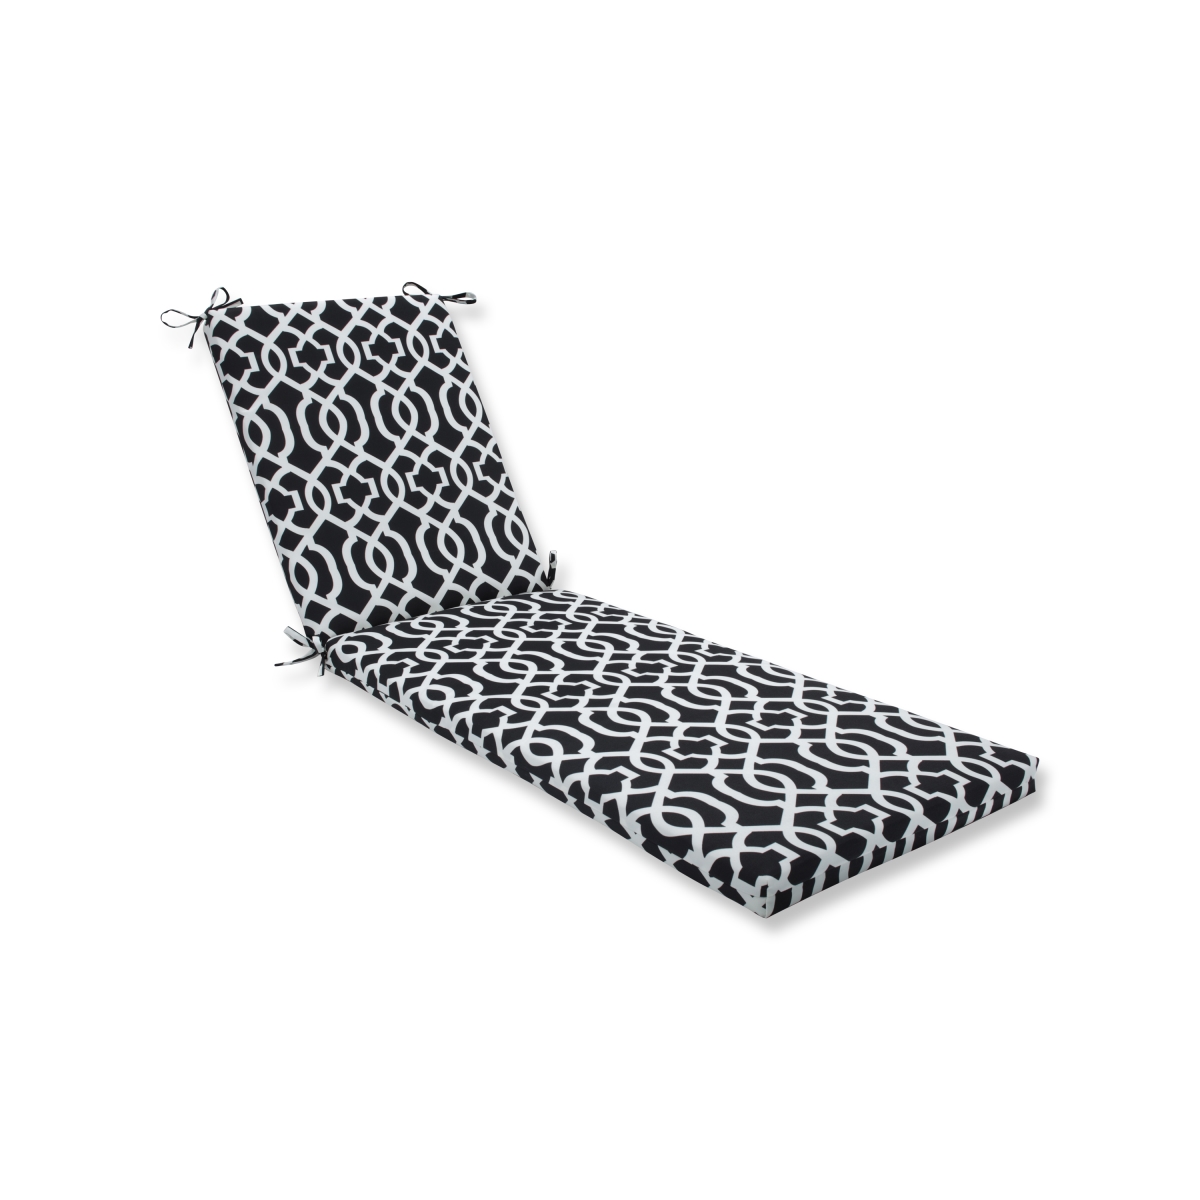 80 X 23 X 3 In. Outdoor & Indoor New Geo Chaise Lounge Cushion, Black & White